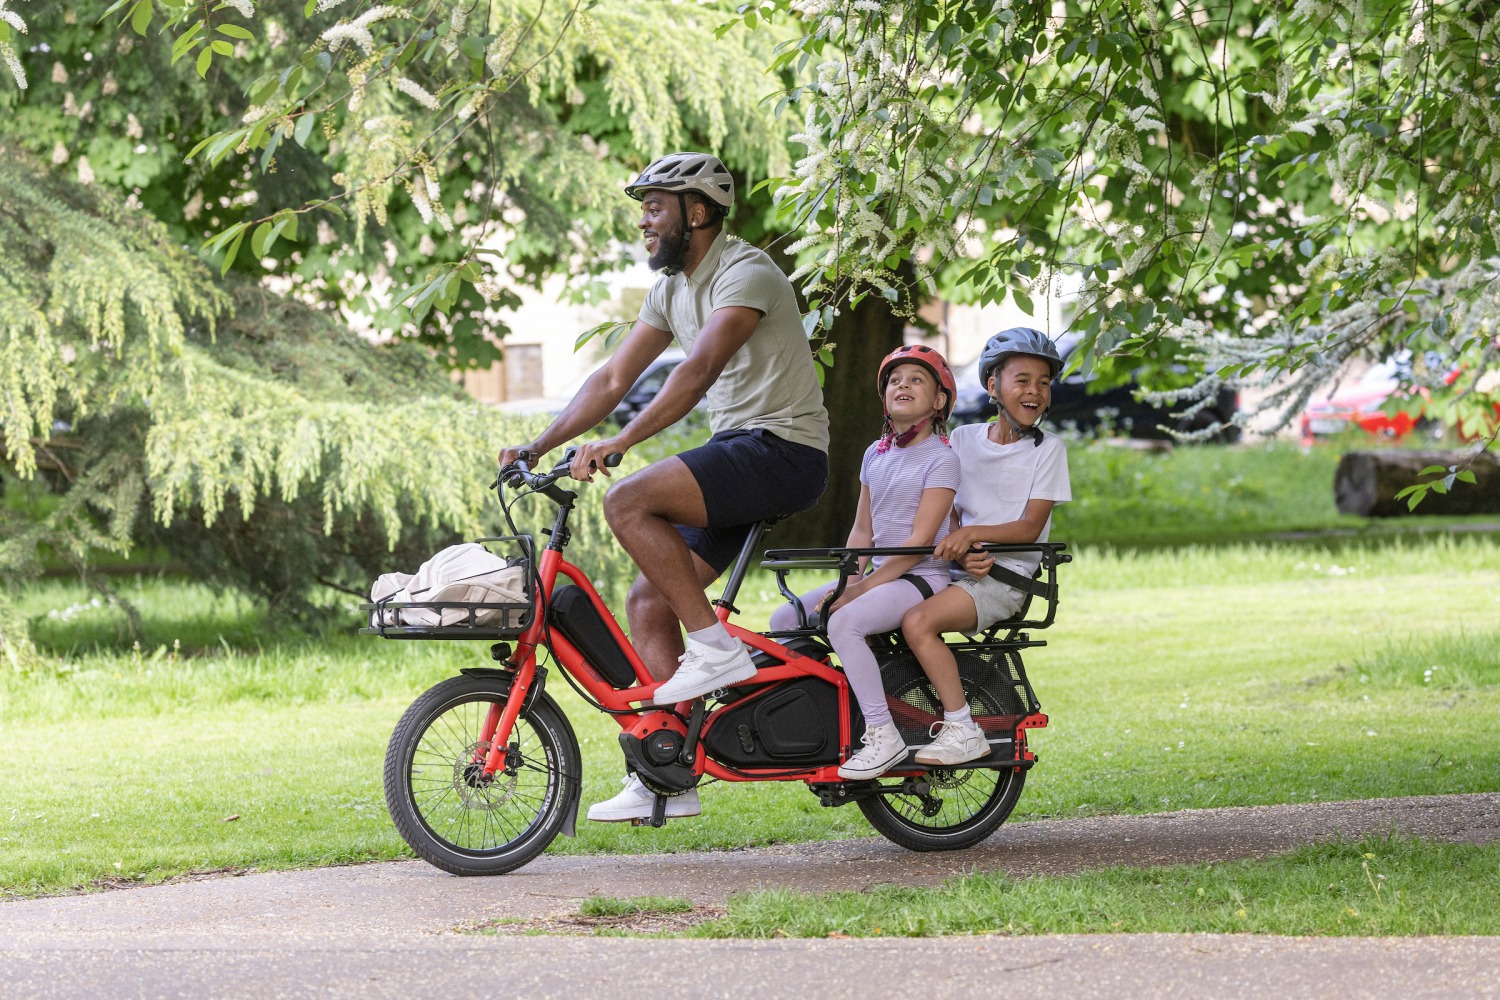 Tern Quick Haul Long longtail cargo bike with children on the rear rack